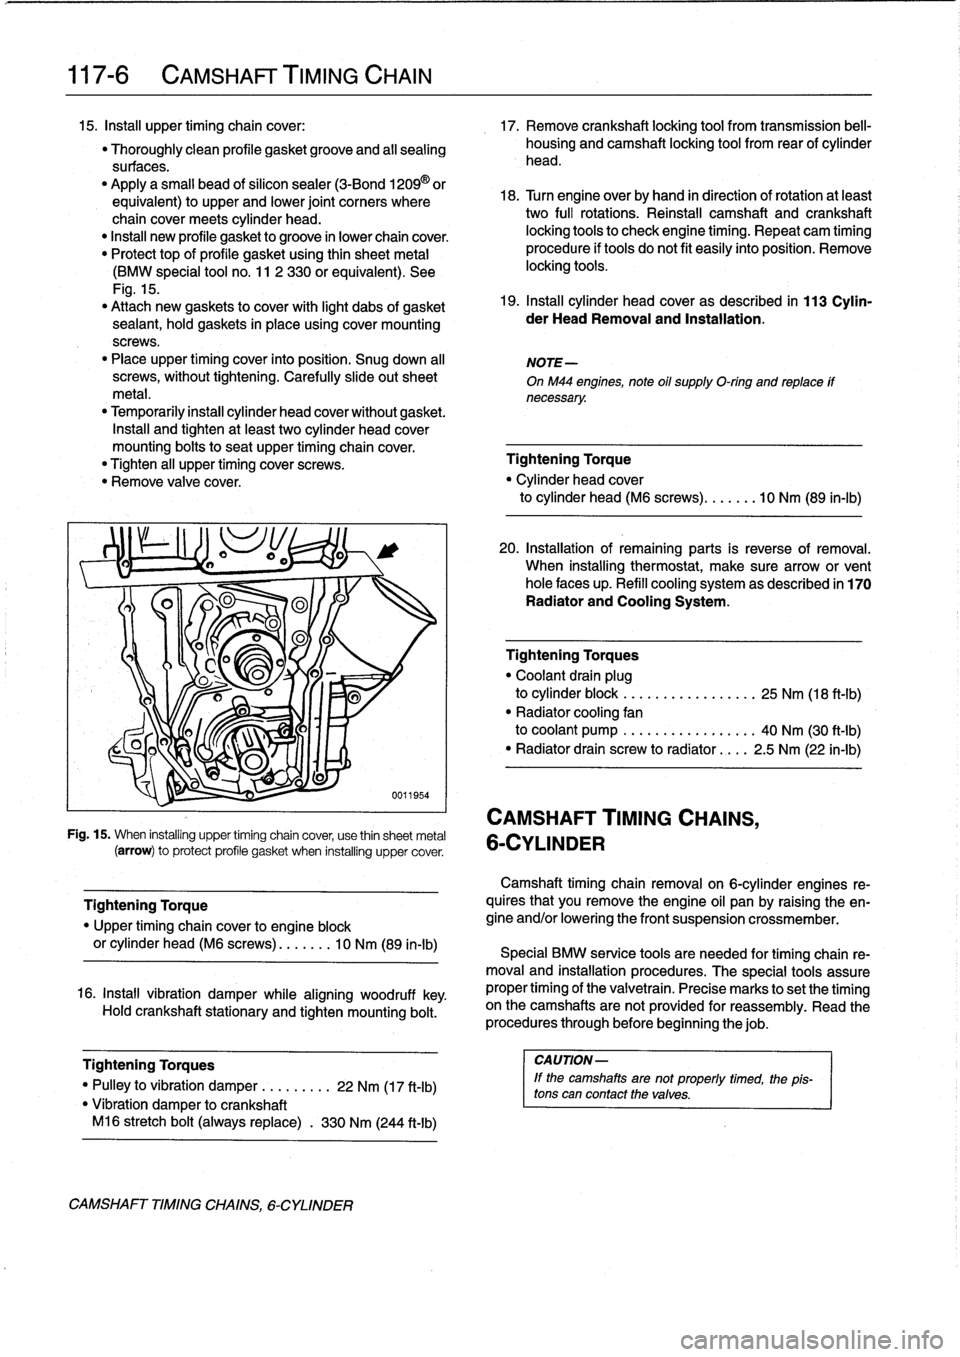 BMW 318i 1997 E36 Workshop Manual 
117-
6

	

CAMSHAFT
TIMING
CHAIN

15
.
Insta¡¡
upper
timing
chaincover
:

	

17
.
Remove
crankshaft
locking
tool
from
transmission
bell-

"
Thoroughly
clean
profile
gasketgroove
and
all
sealing

	
